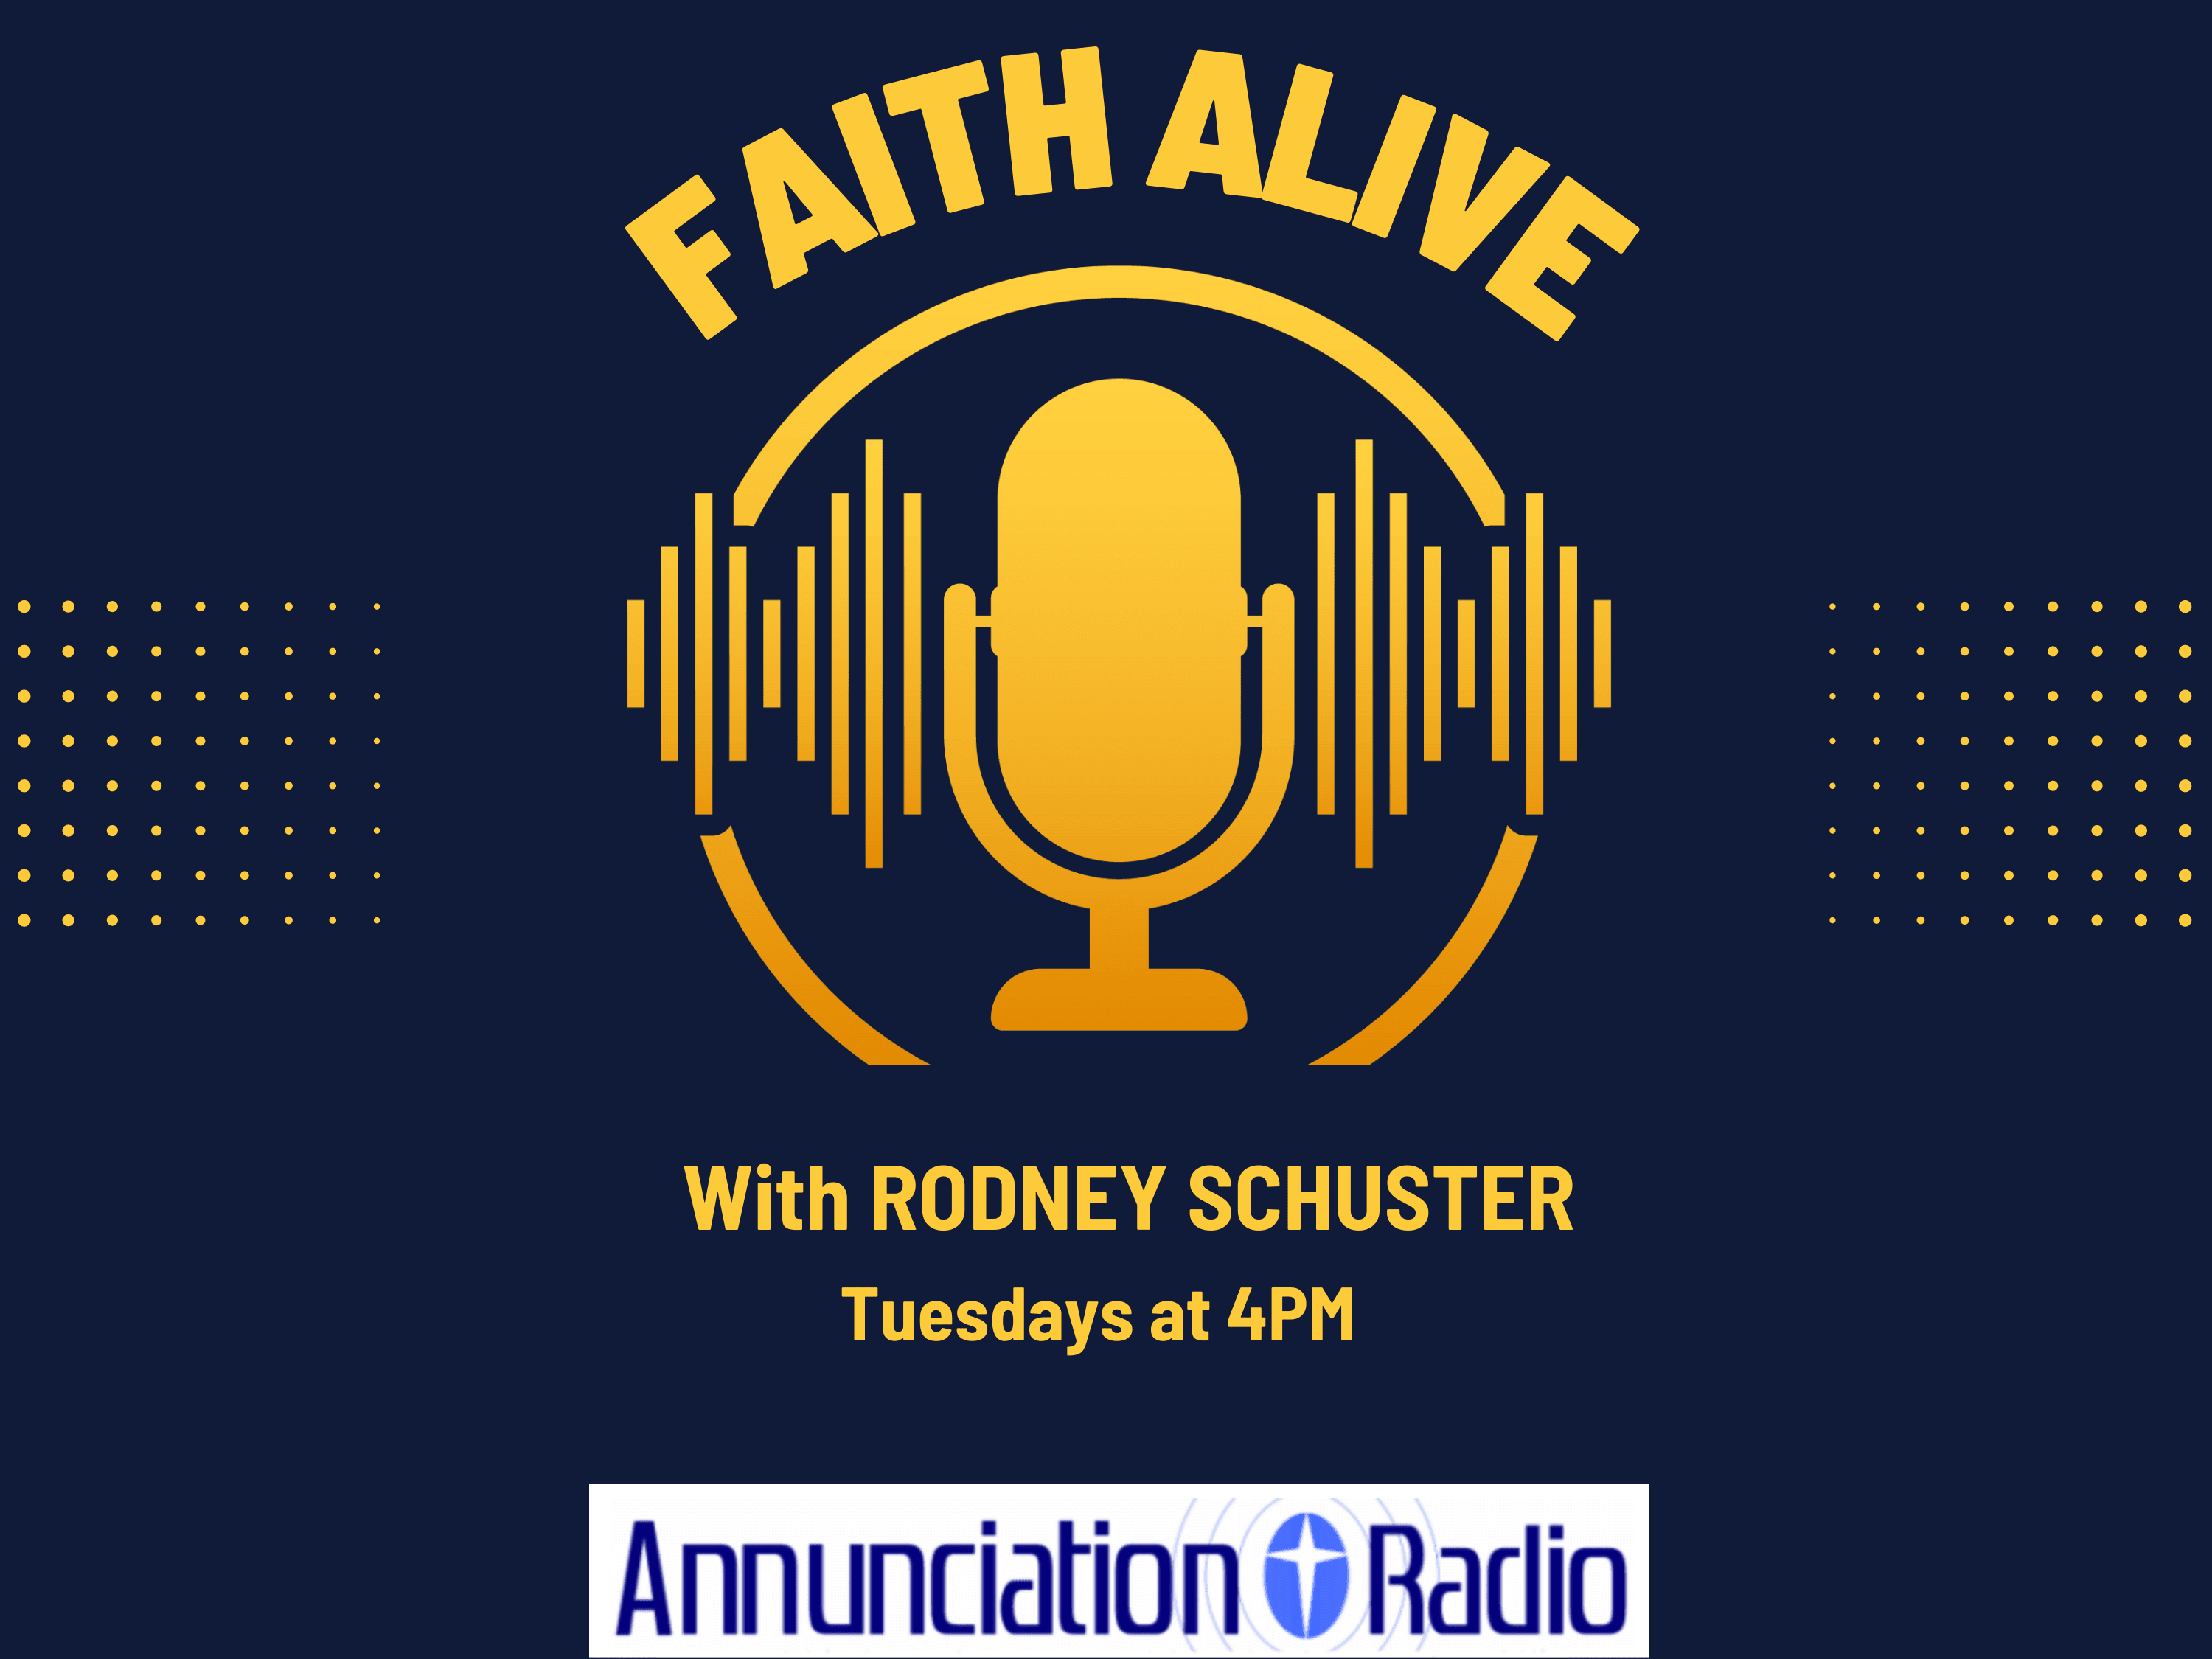 Catholic Charities Diocese of Toledo's hour-long Faith Alive program airs weekly on Annunciation Radio on Tuesdays at 4 p.m. and is re-broadcast at 3 p.m. on Saturdays. Listen to archived "Faith Alive" programs on demand.